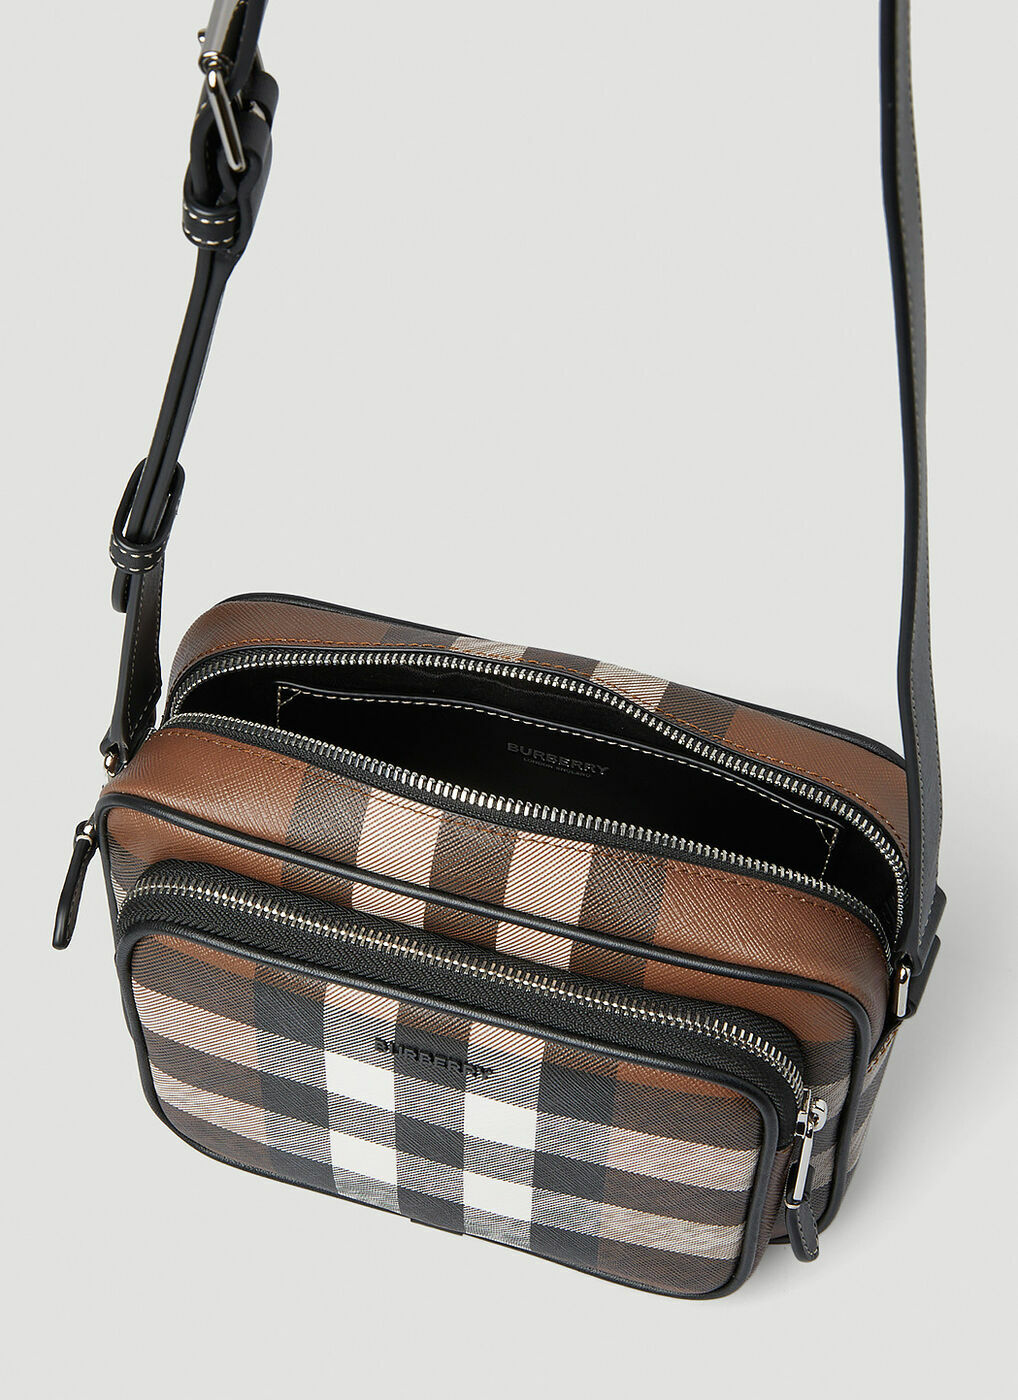 Burberry - Check Paddy Crossbody Bag in Brown Burberry